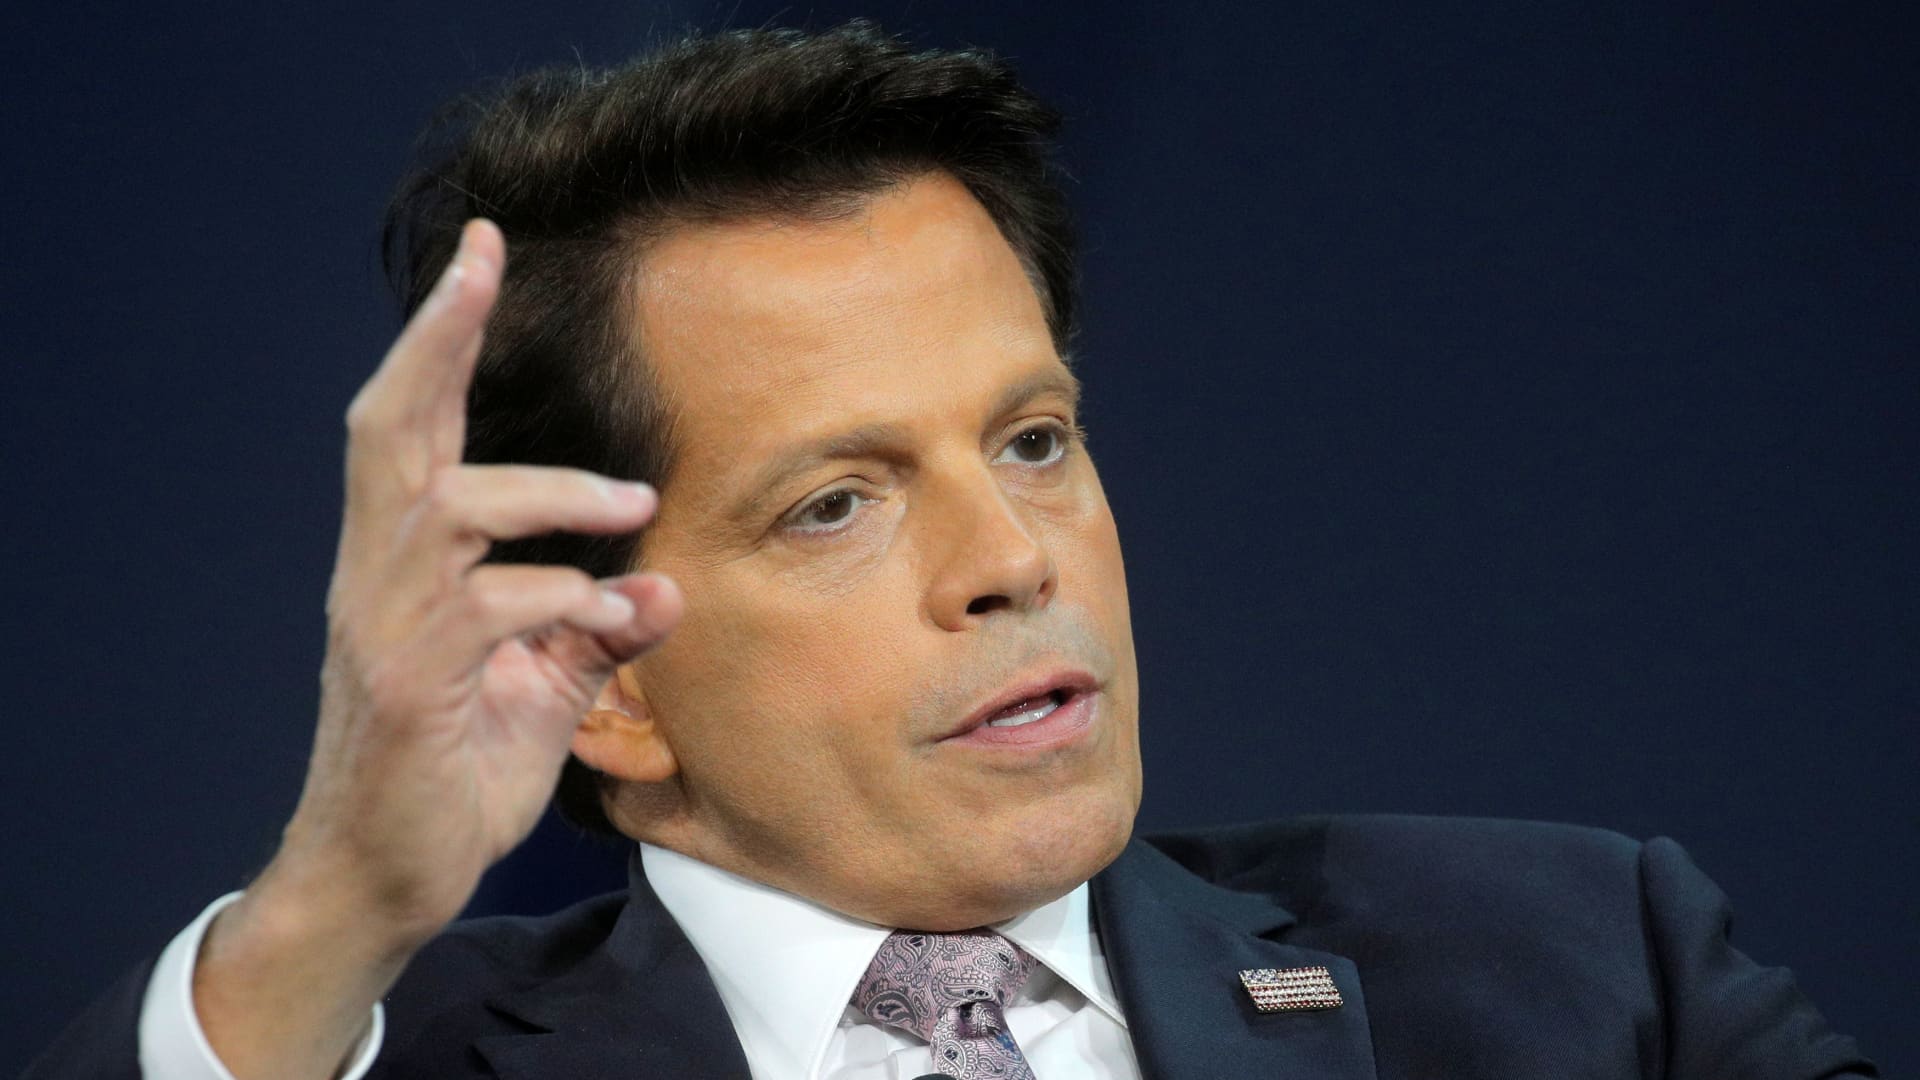 Scaramucci talks FTX, Sam Bankman-Fried and 'the worst week in cryptocurrency history'